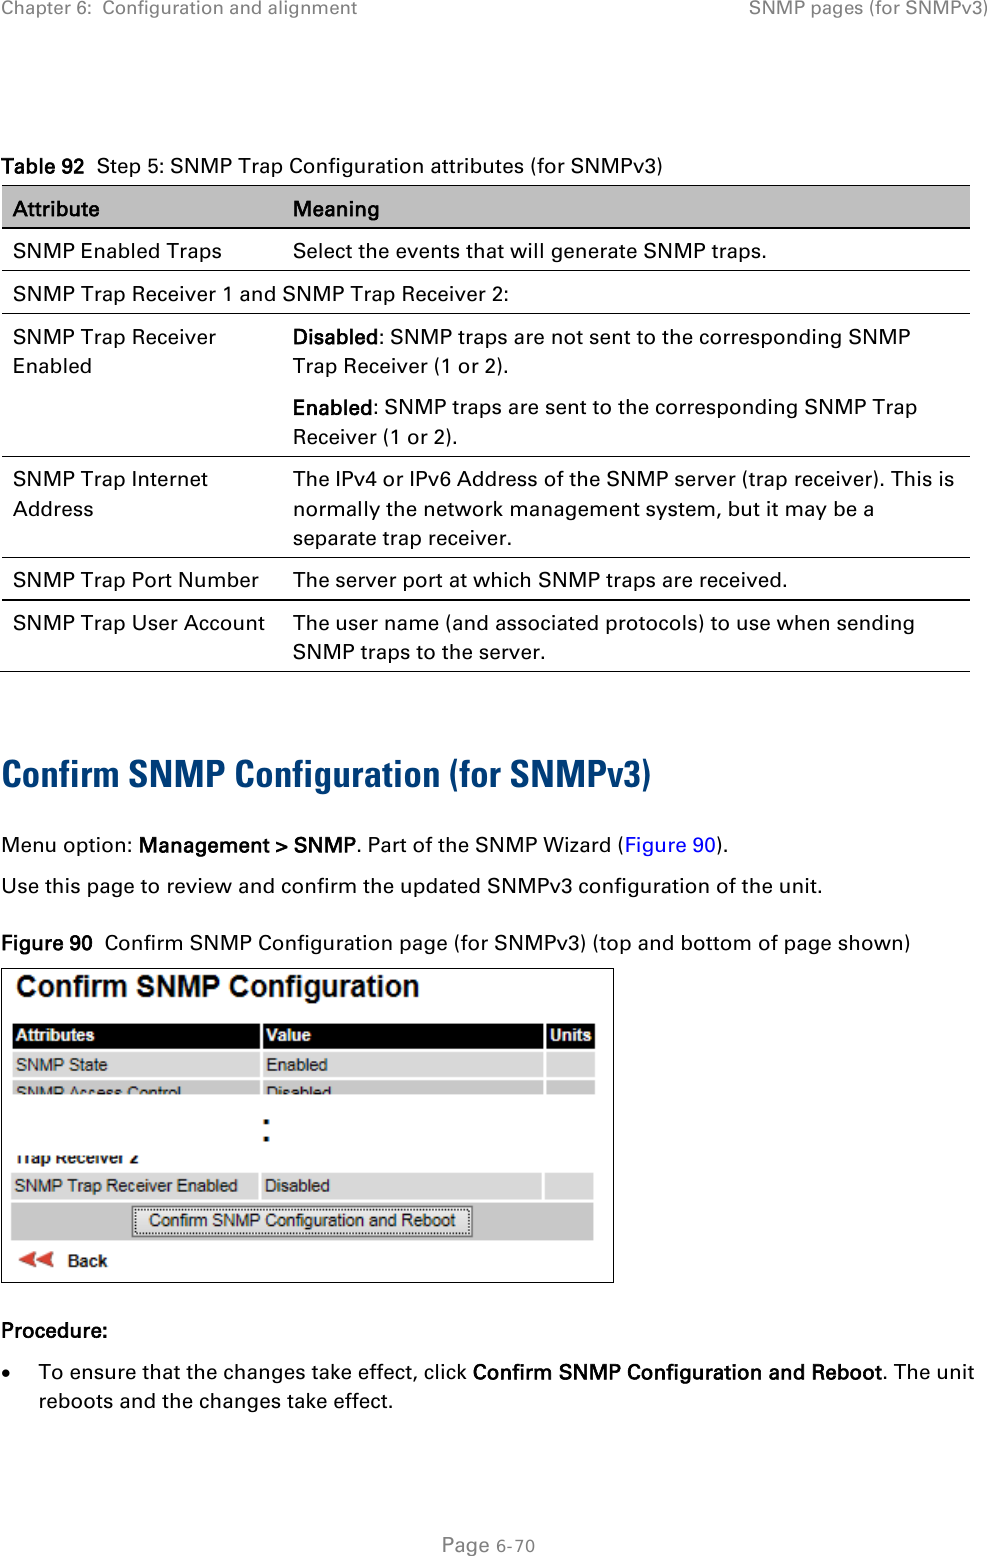 Chapter 6:  Configuration and alignment SNMP pages (for SNMPv3)   Table 92  Step 5: SNMP Trap Configuration attributes (for SNMPv3) Attribute Meaning SNMP Enabled Traps Select the events that will generate SNMP traps. SNMP Trap Receiver 1 and SNMP Trap Receiver 2: SNMP Trap Receiver Enabled Disabled: SNMP traps are not sent to the corresponding SNMP Trap Receiver (1 or 2). Enabled: SNMP traps are sent to the corresponding SNMP Trap Receiver (1 or 2). SNMP Trap Internet Address The IPv4 or IPv6 Address of the SNMP server (trap receiver). This is normally the network management system, but it may be a separate trap receiver. SNMP Trap Port Number The server port at which SNMP traps are received. SNMP Trap User Account The user name (and associated protocols) to use when sending SNMP traps to the server.  Confirm SNMP Configuration (for SNMPv3)  Menu option: Management &gt; SNMP. Part of the SNMP Wizard (Figure 90). Use this page to review and confirm the updated SNMPv3 configuration of the unit. Figure 90  Confirm SNMP Configuration page (for SNMPv3) (top and bottom of page shown)  Procedure: • To ensure that the changes take effect, click Confirm SNMP Configuration and Reboot. The unit reboots and the changes take effect.  Page 6-70 